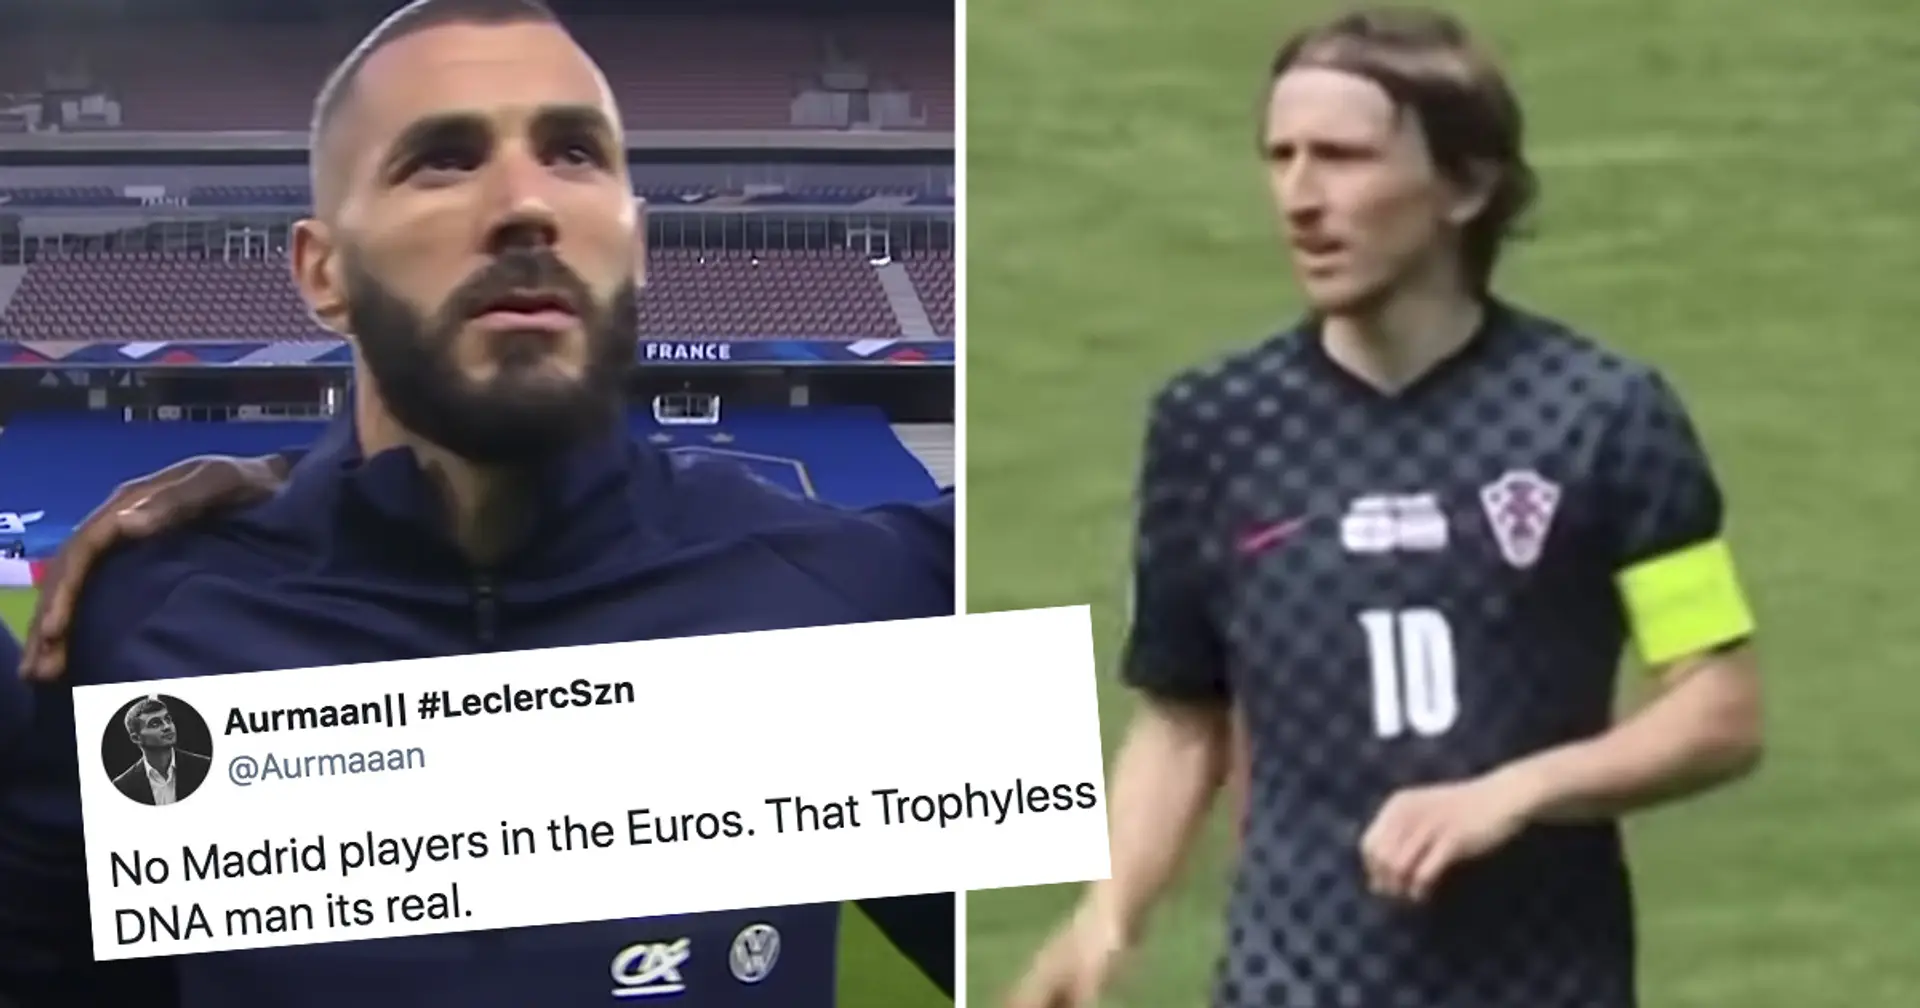 Barca fans mock Real Madrid players for Euro 2020 elimination – one thing would keep their mouths shut